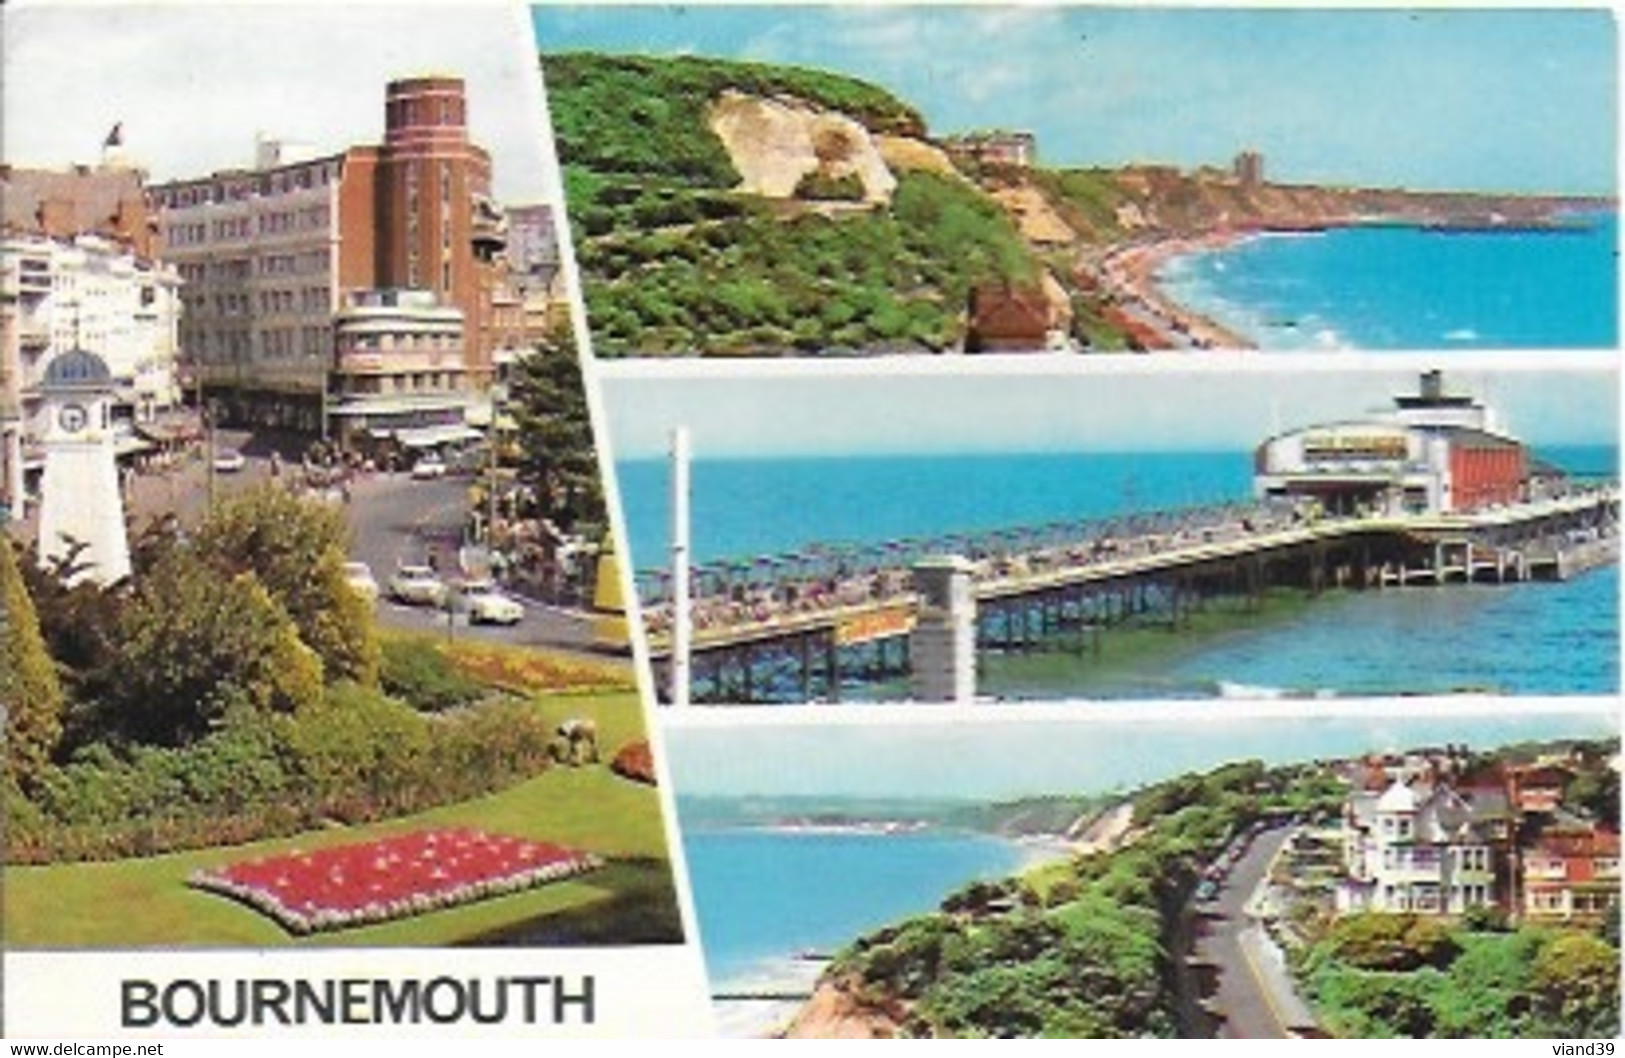 Bournemouth - - Bournemouth (from 1972)